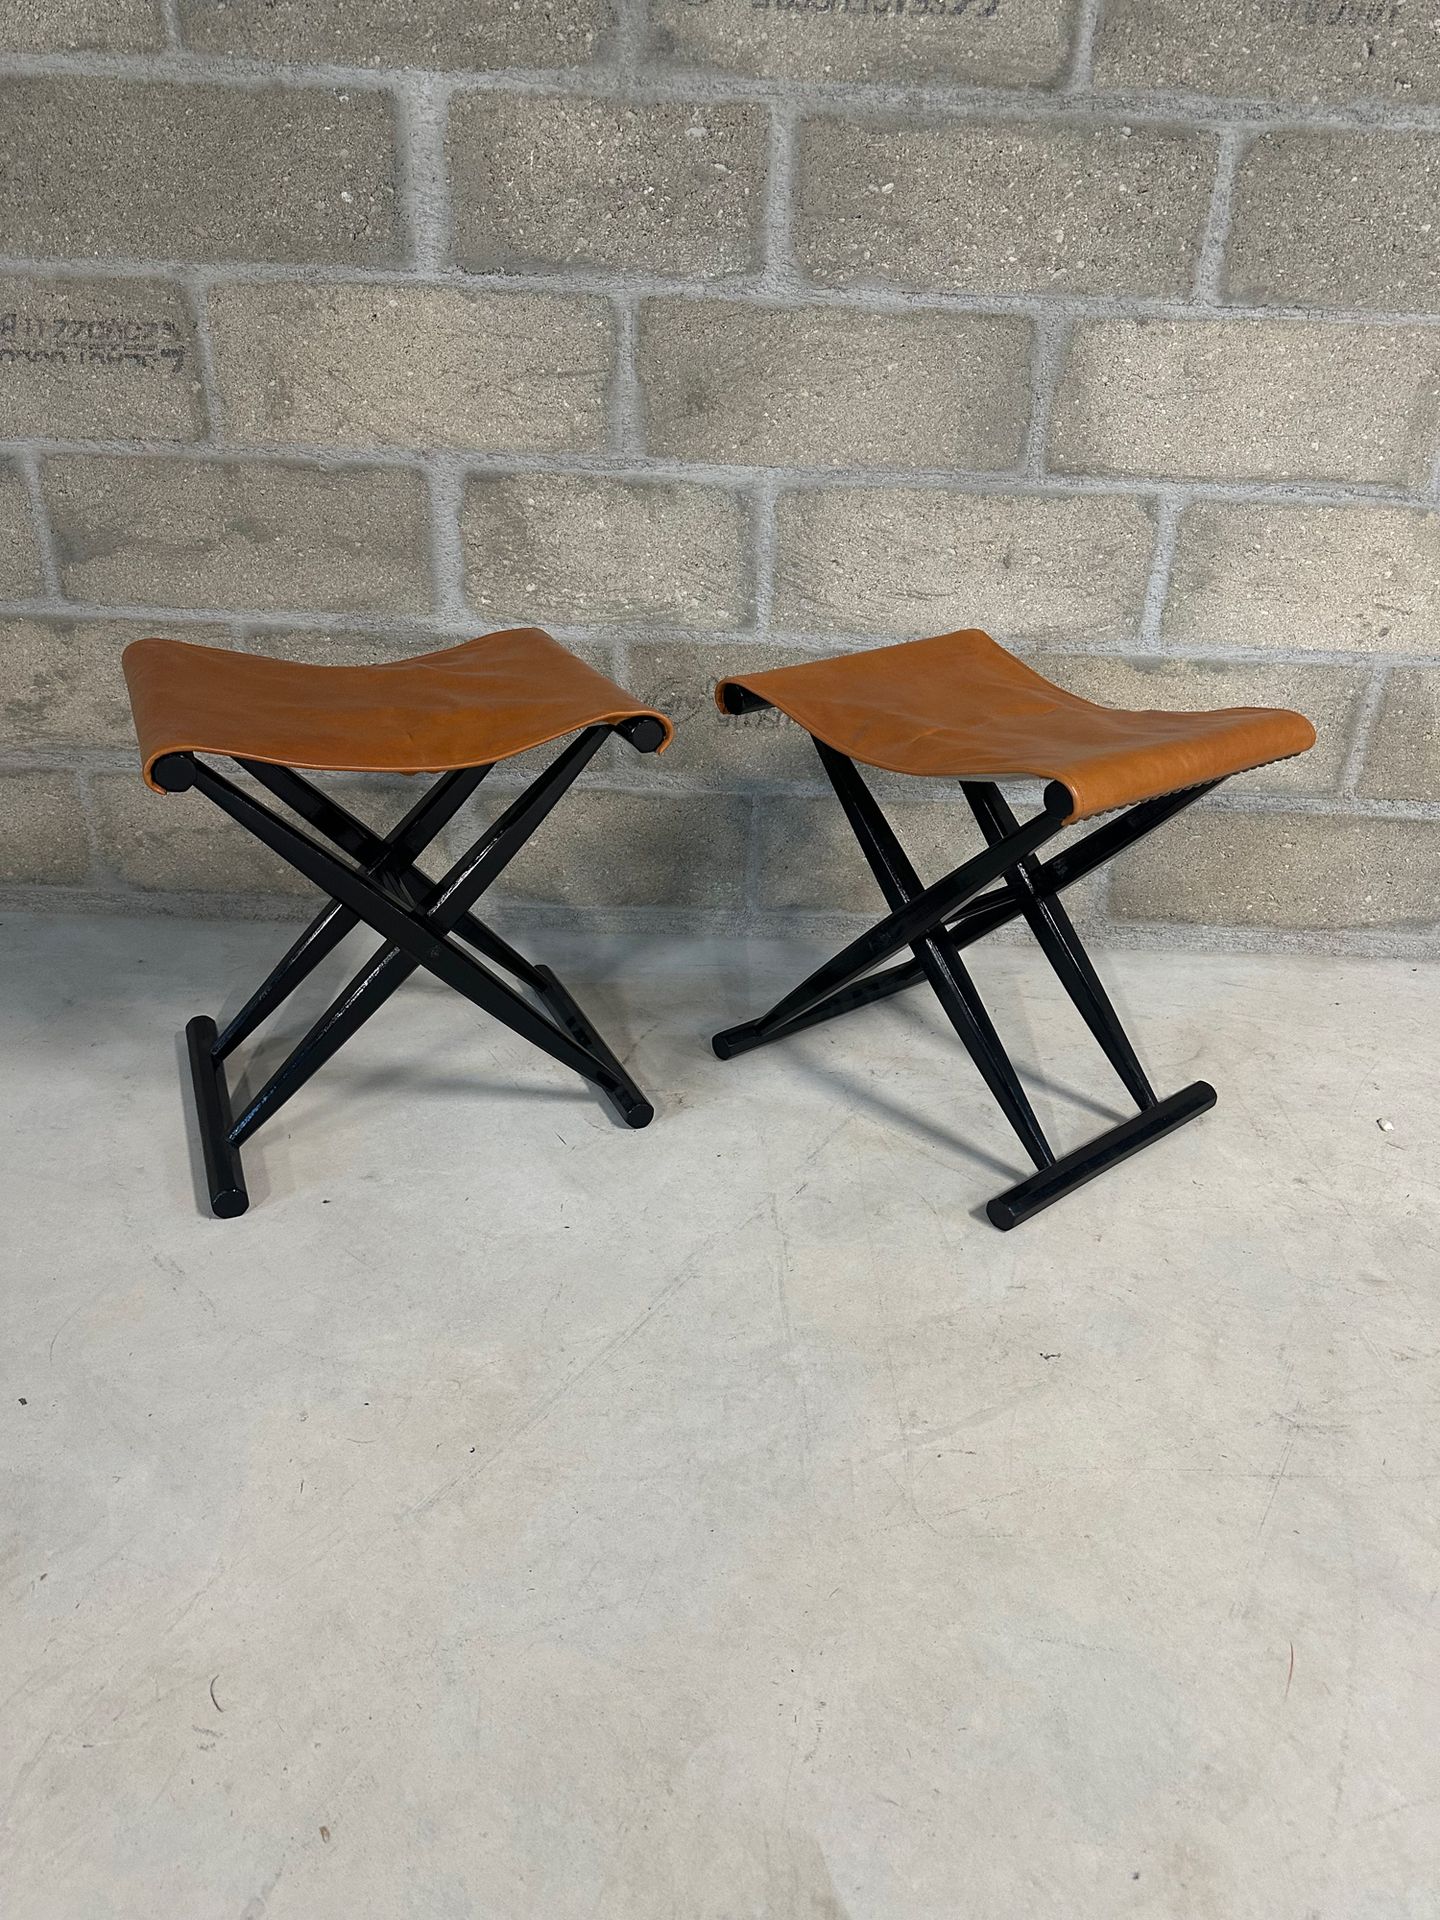 Travail Moderne Pair of folding stools
Black lacquered wood "X" legs, camel skai&hellip;